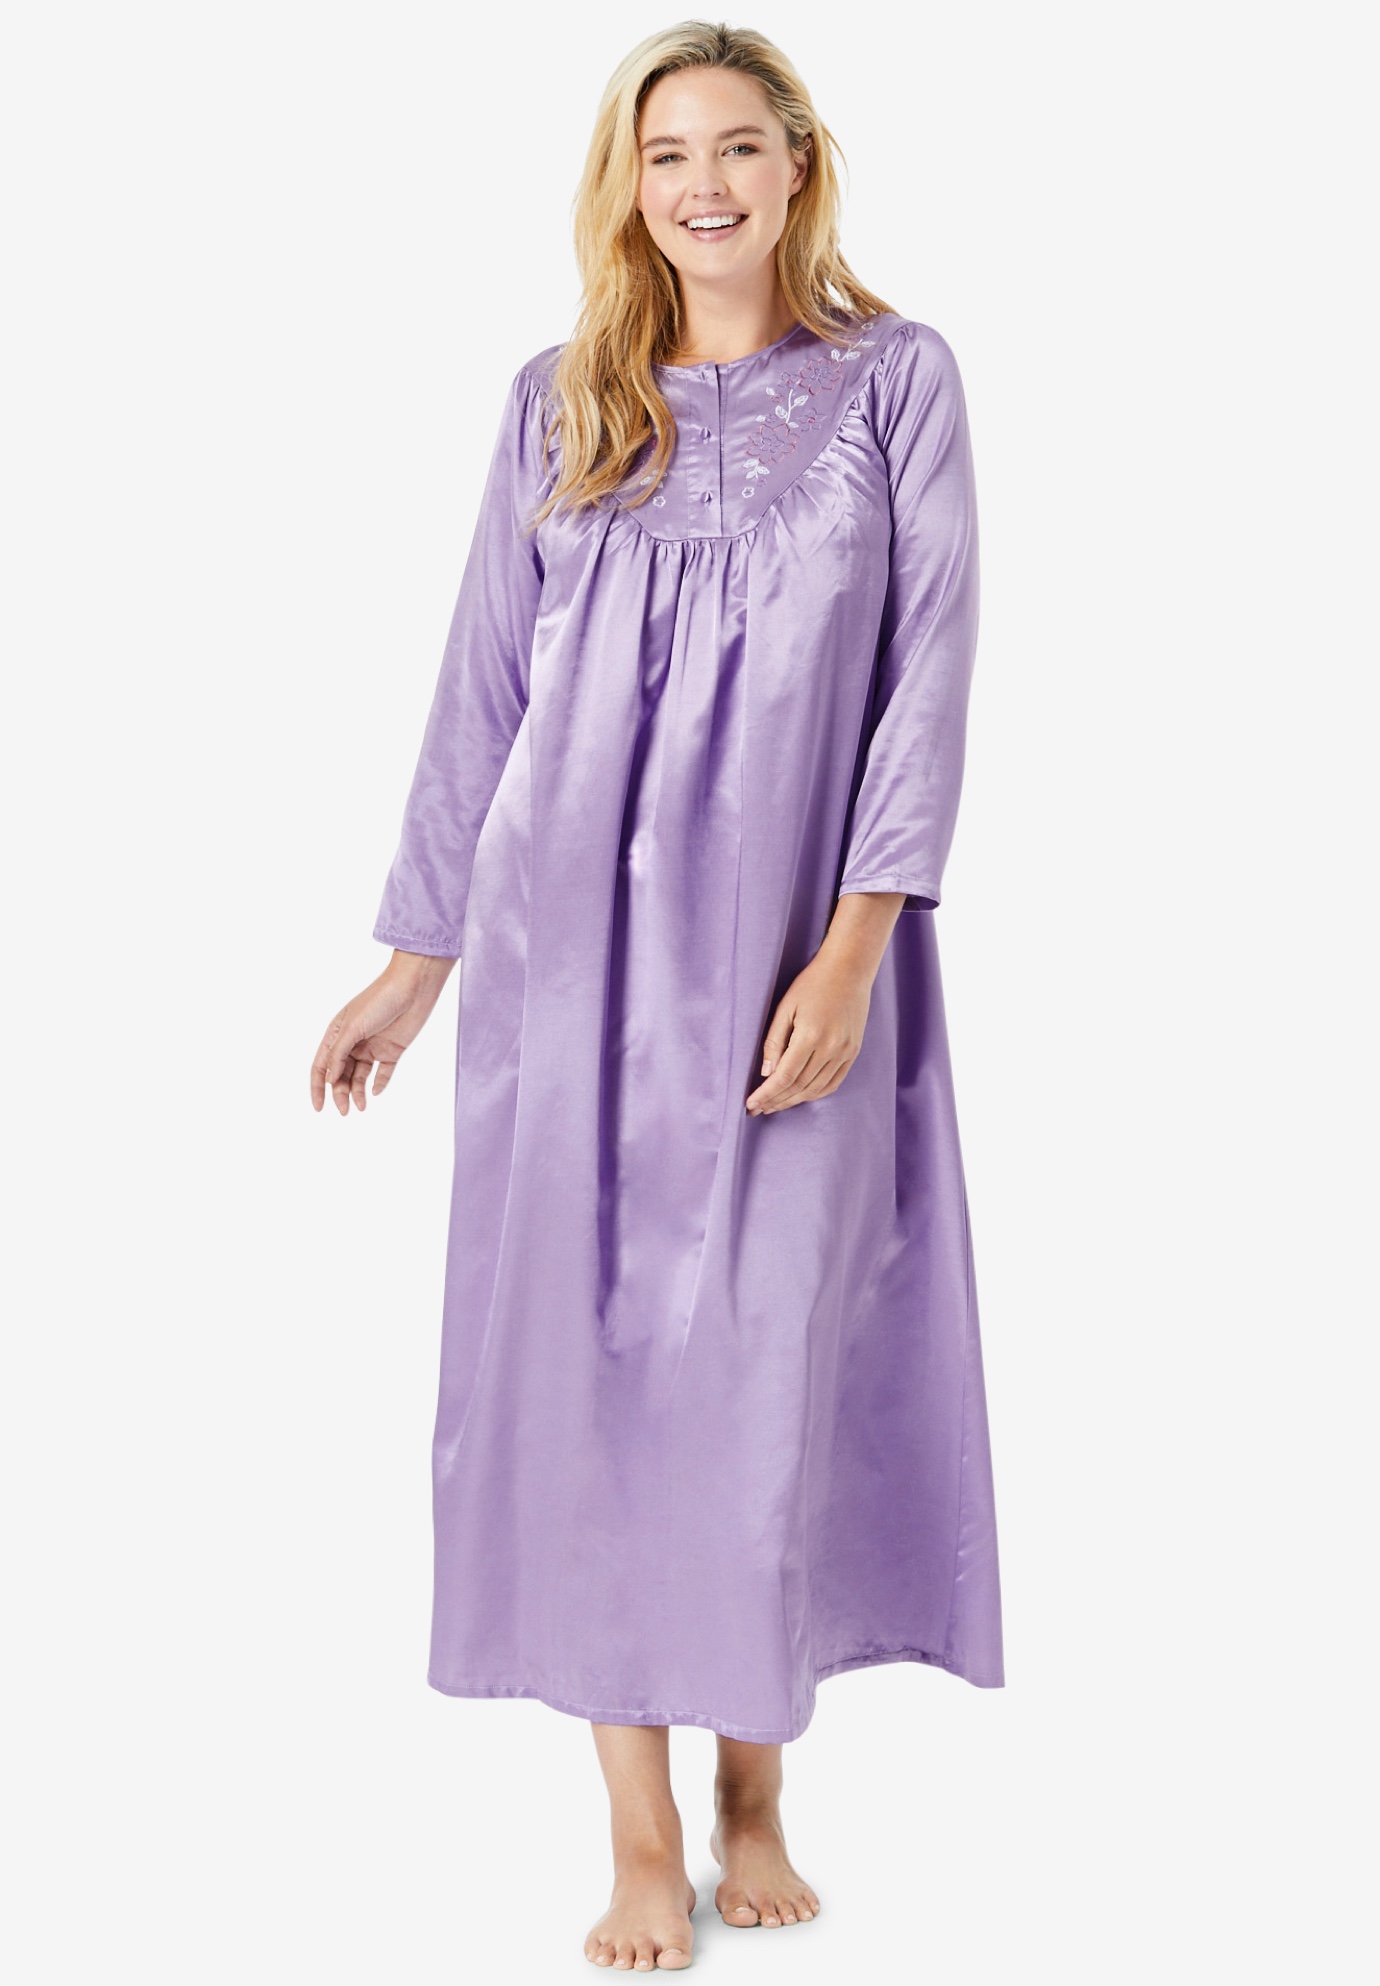 Embroidered Bib Brushed Satin Nightgown | Catherines